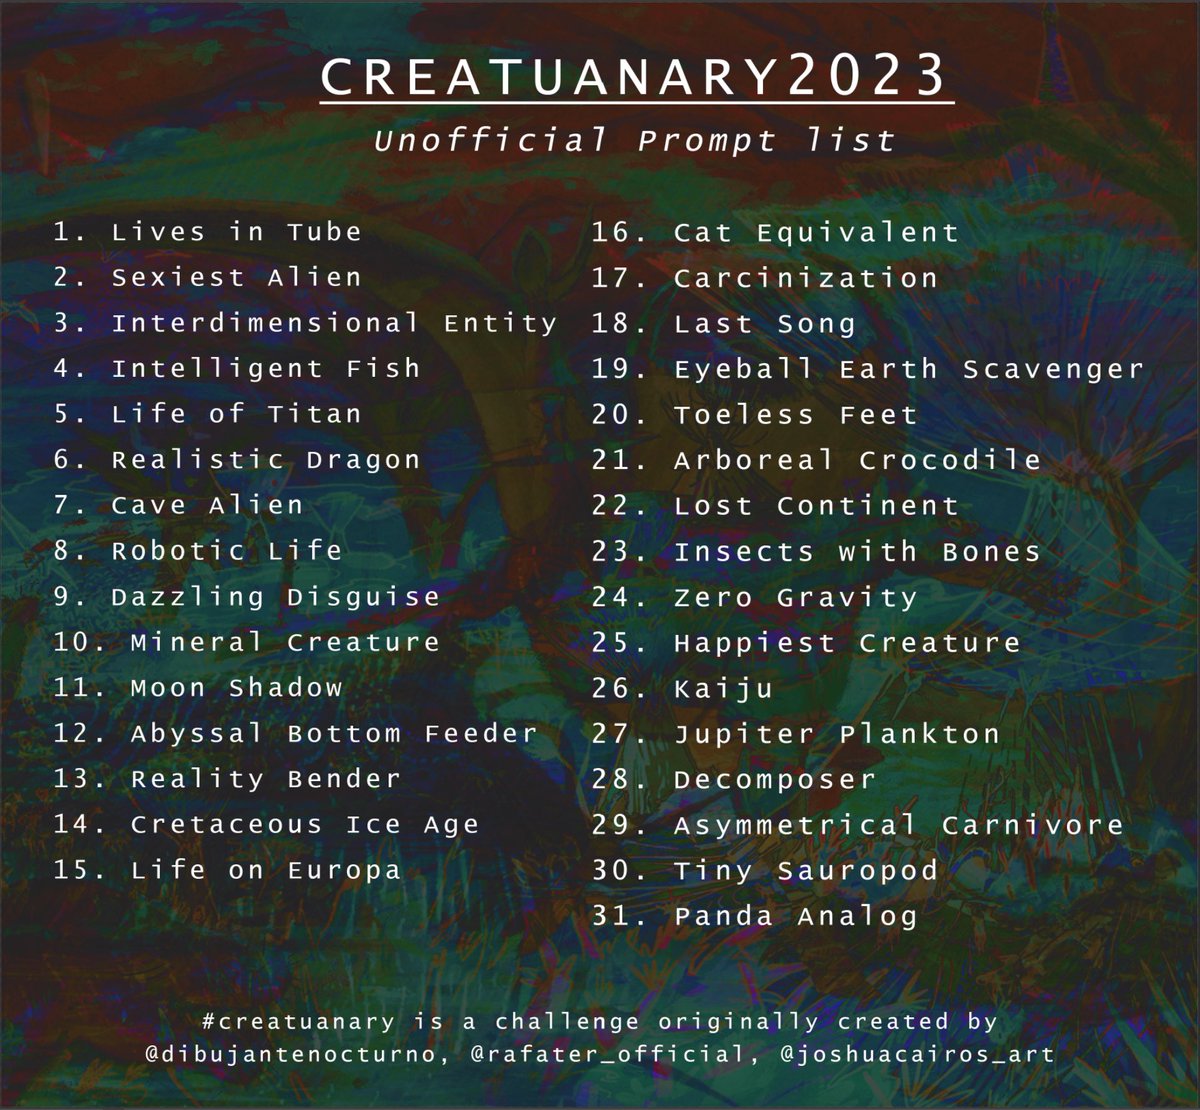 (Need Name Later) 

This creature search his mate and once he found his mate it start it mating dance. The male have colorful tendrils and Fins to improve his mate

#creatuanary_crew2023